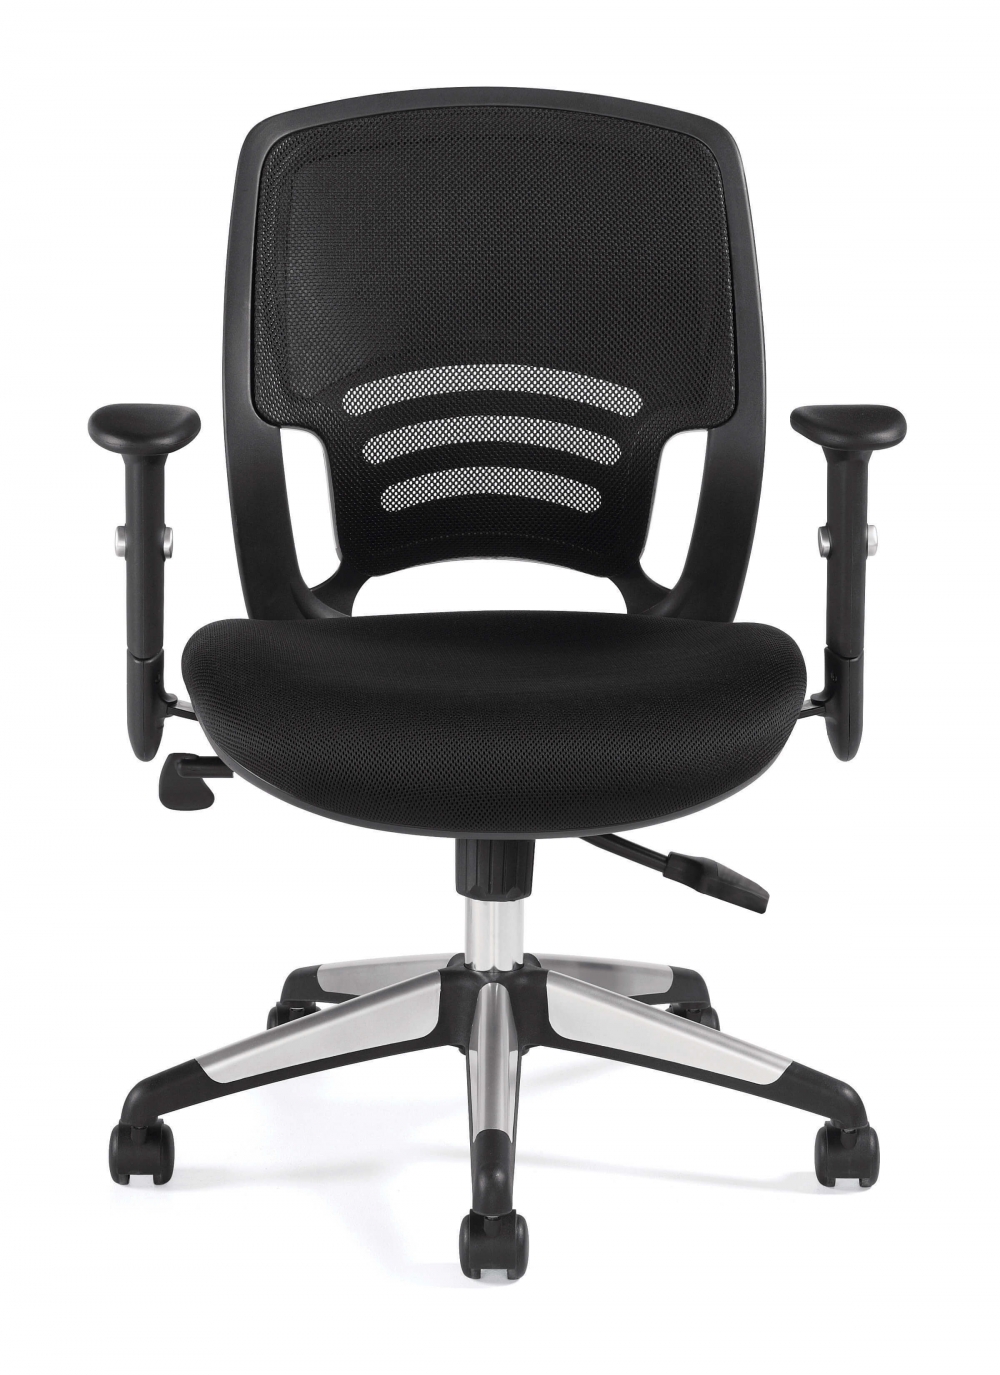 Stylish office chairs front view